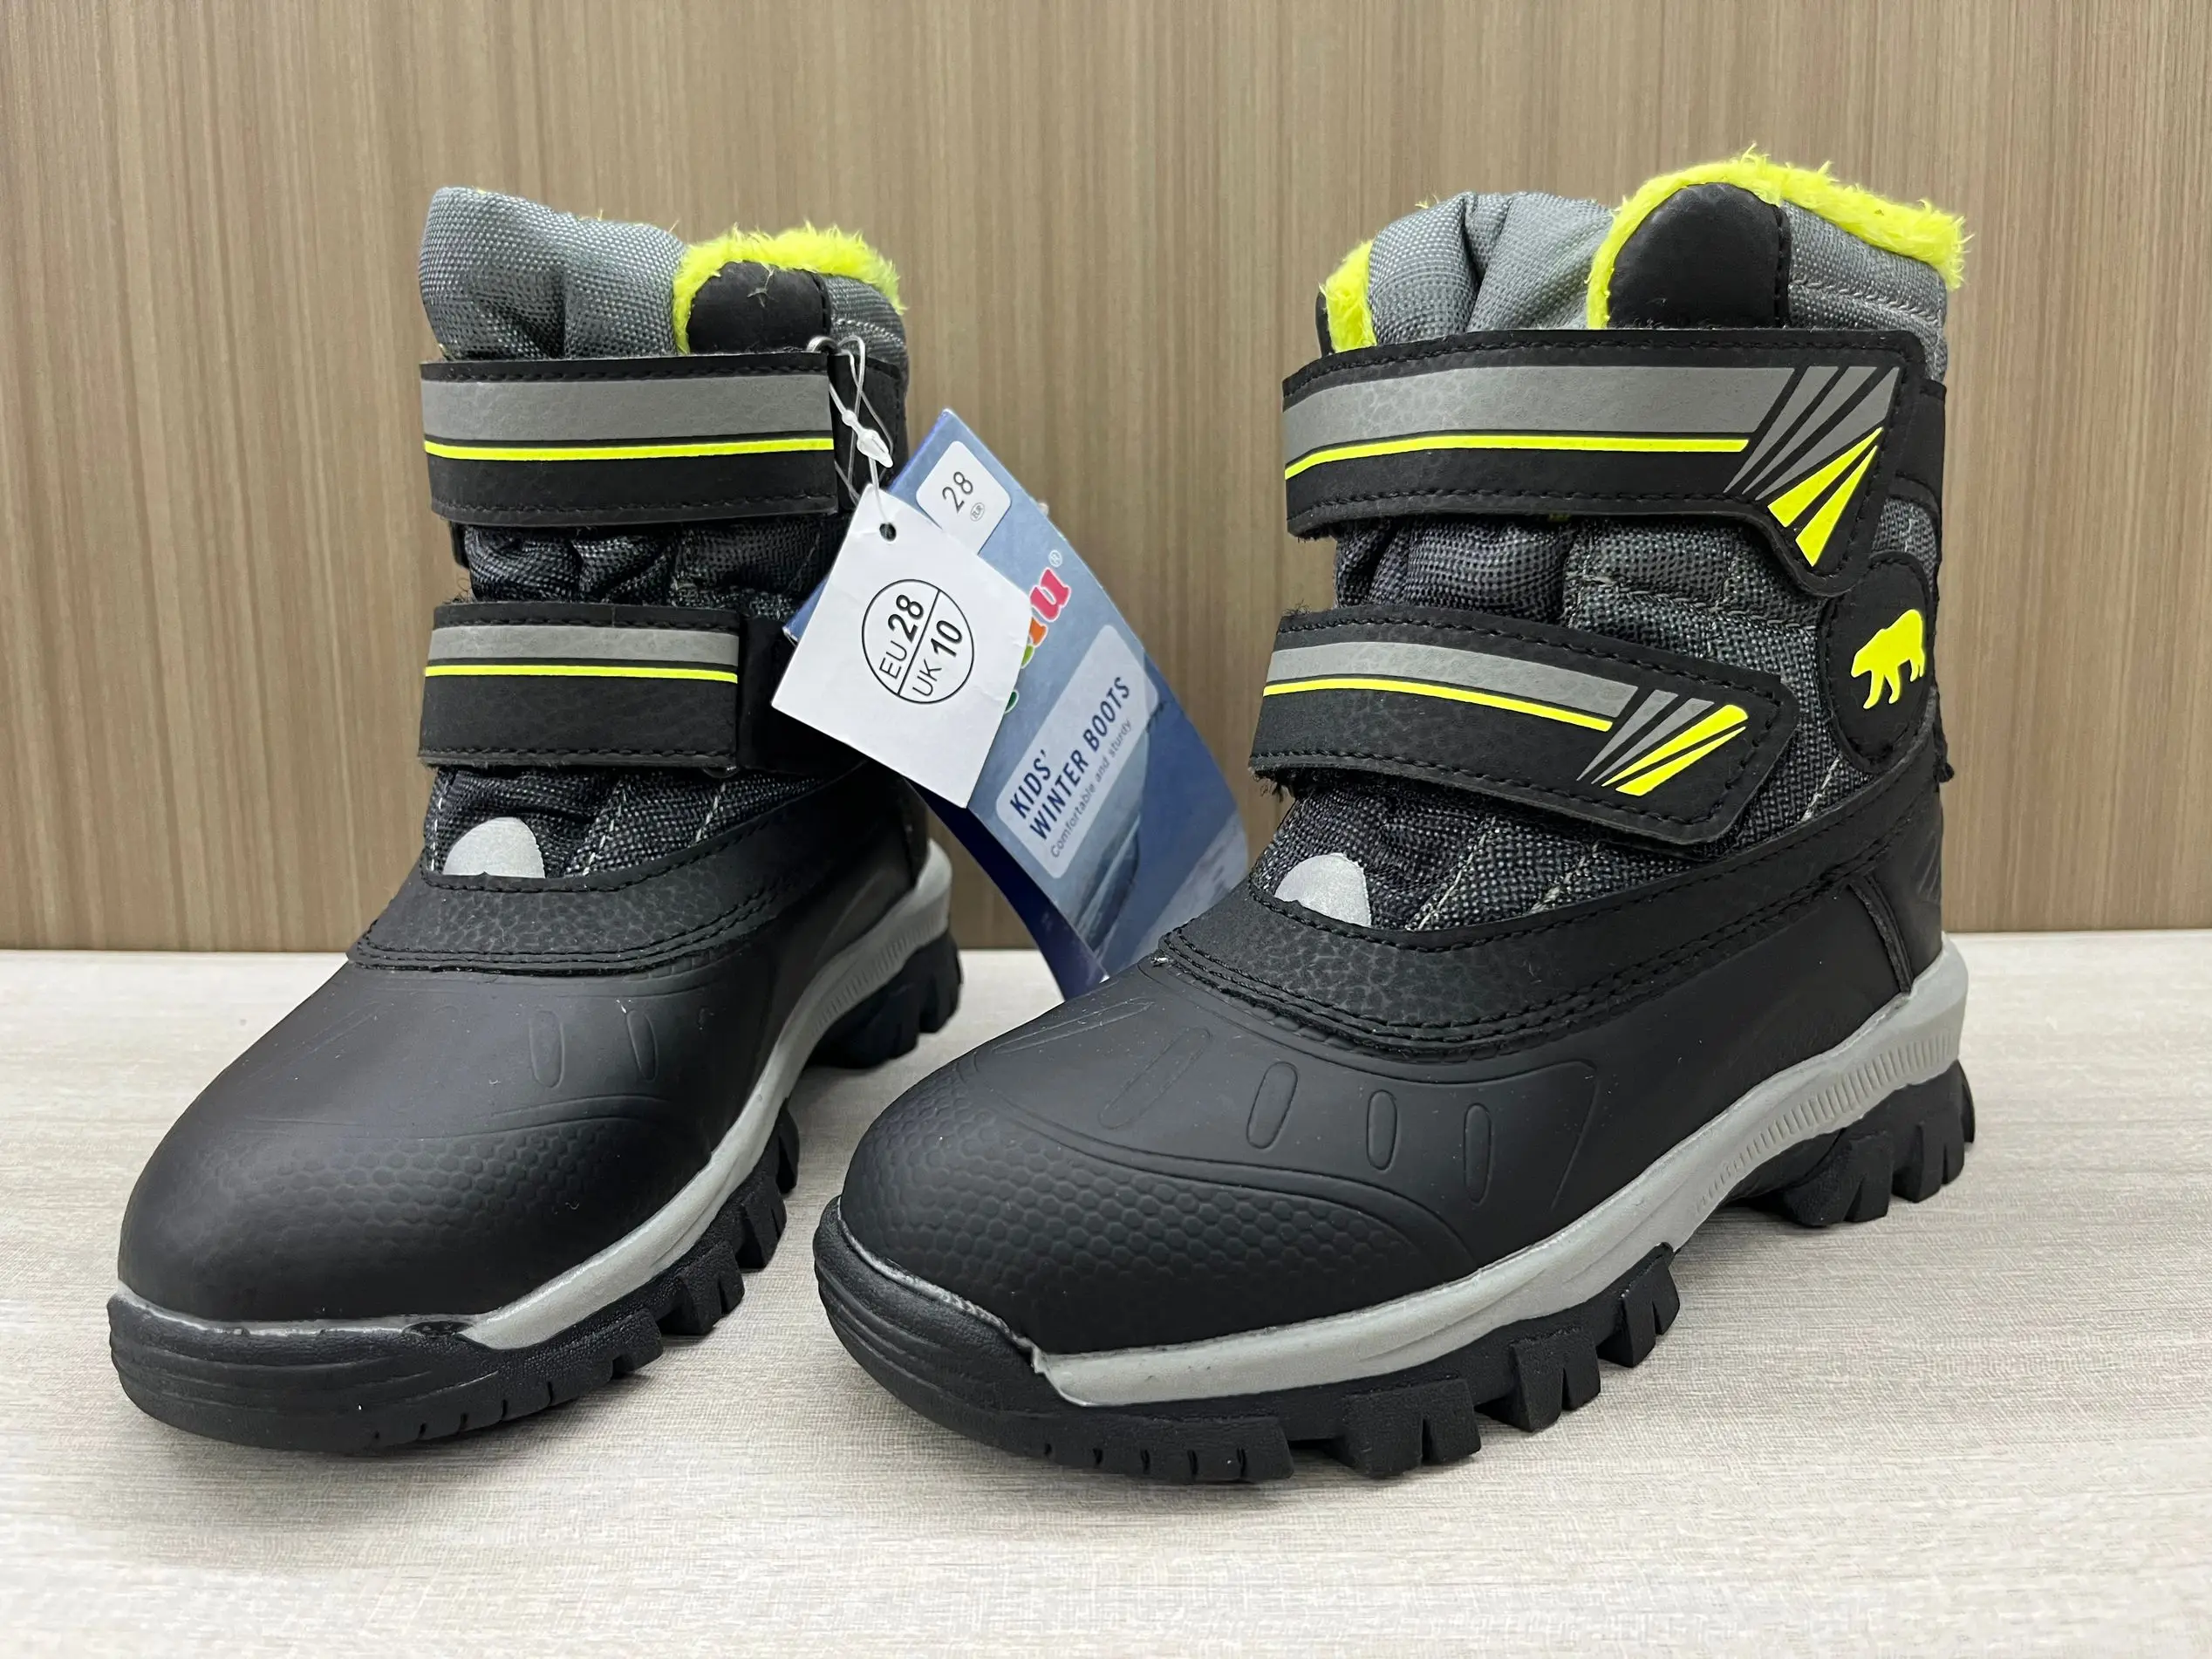 Top Quality Waterproof Children Snow Boots Fashion Boys Winter Shoes With Plush Non-Slip Thickening Keep Warm Size 25-30